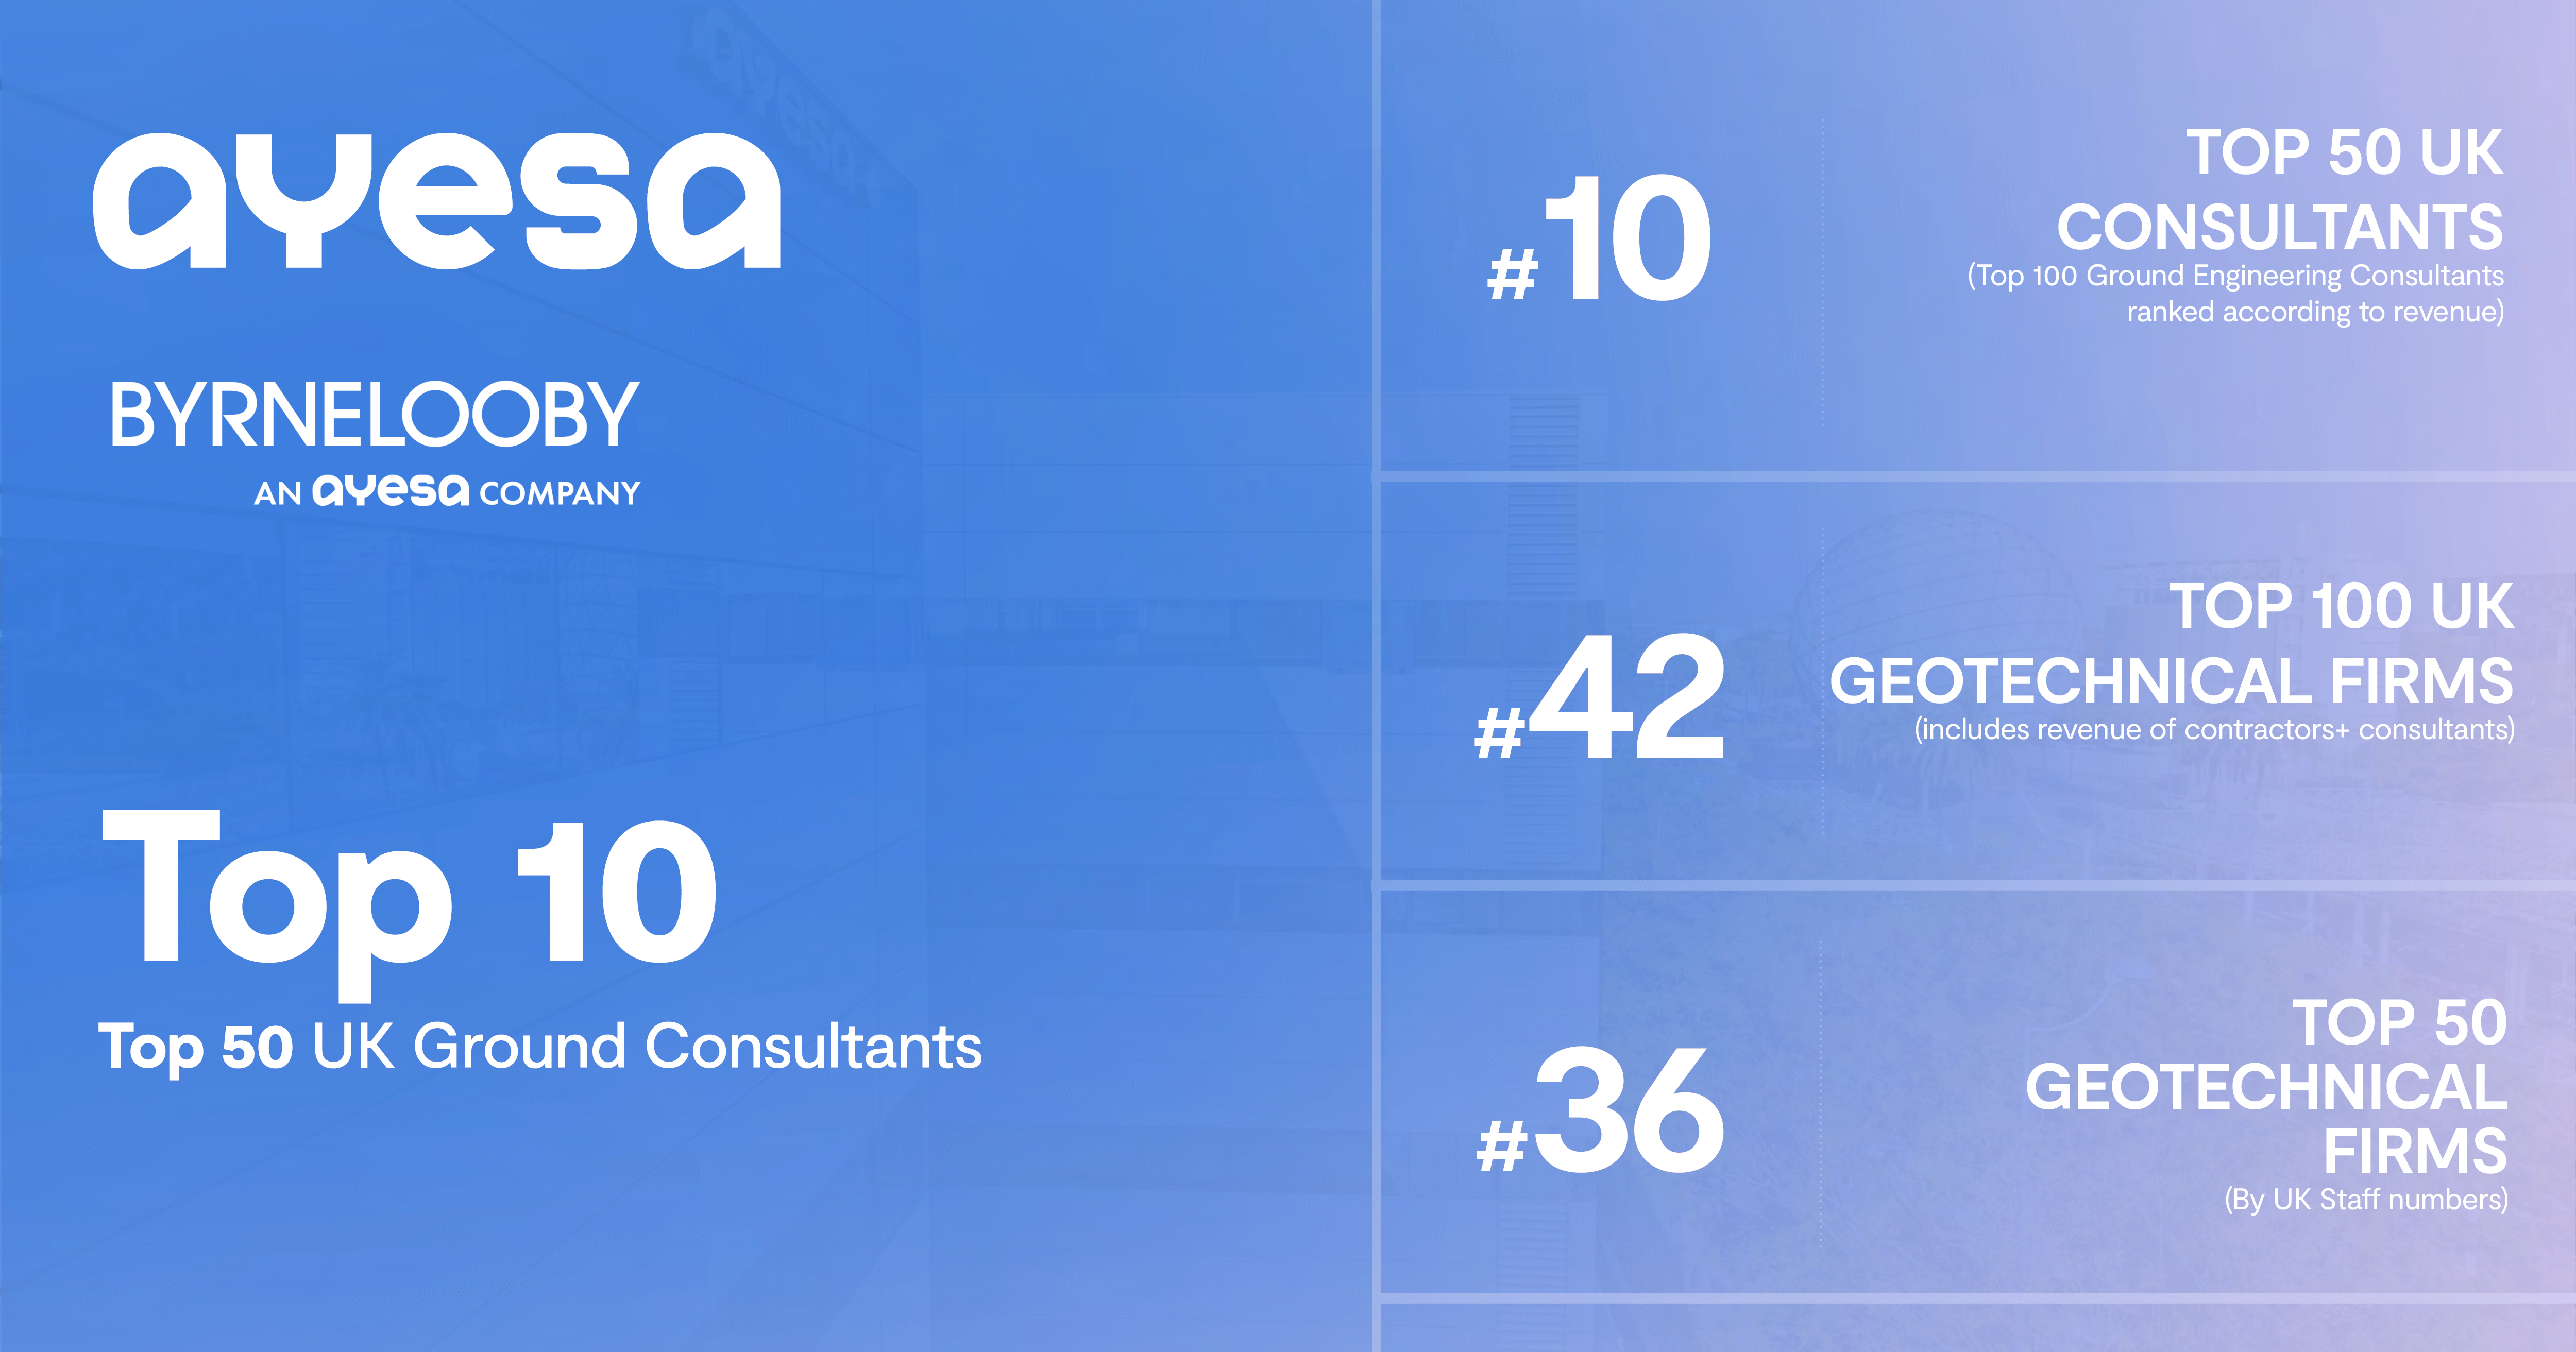 We are ranked in the Top 10 of Top 50 UK Ground Consultants for a second year in a row